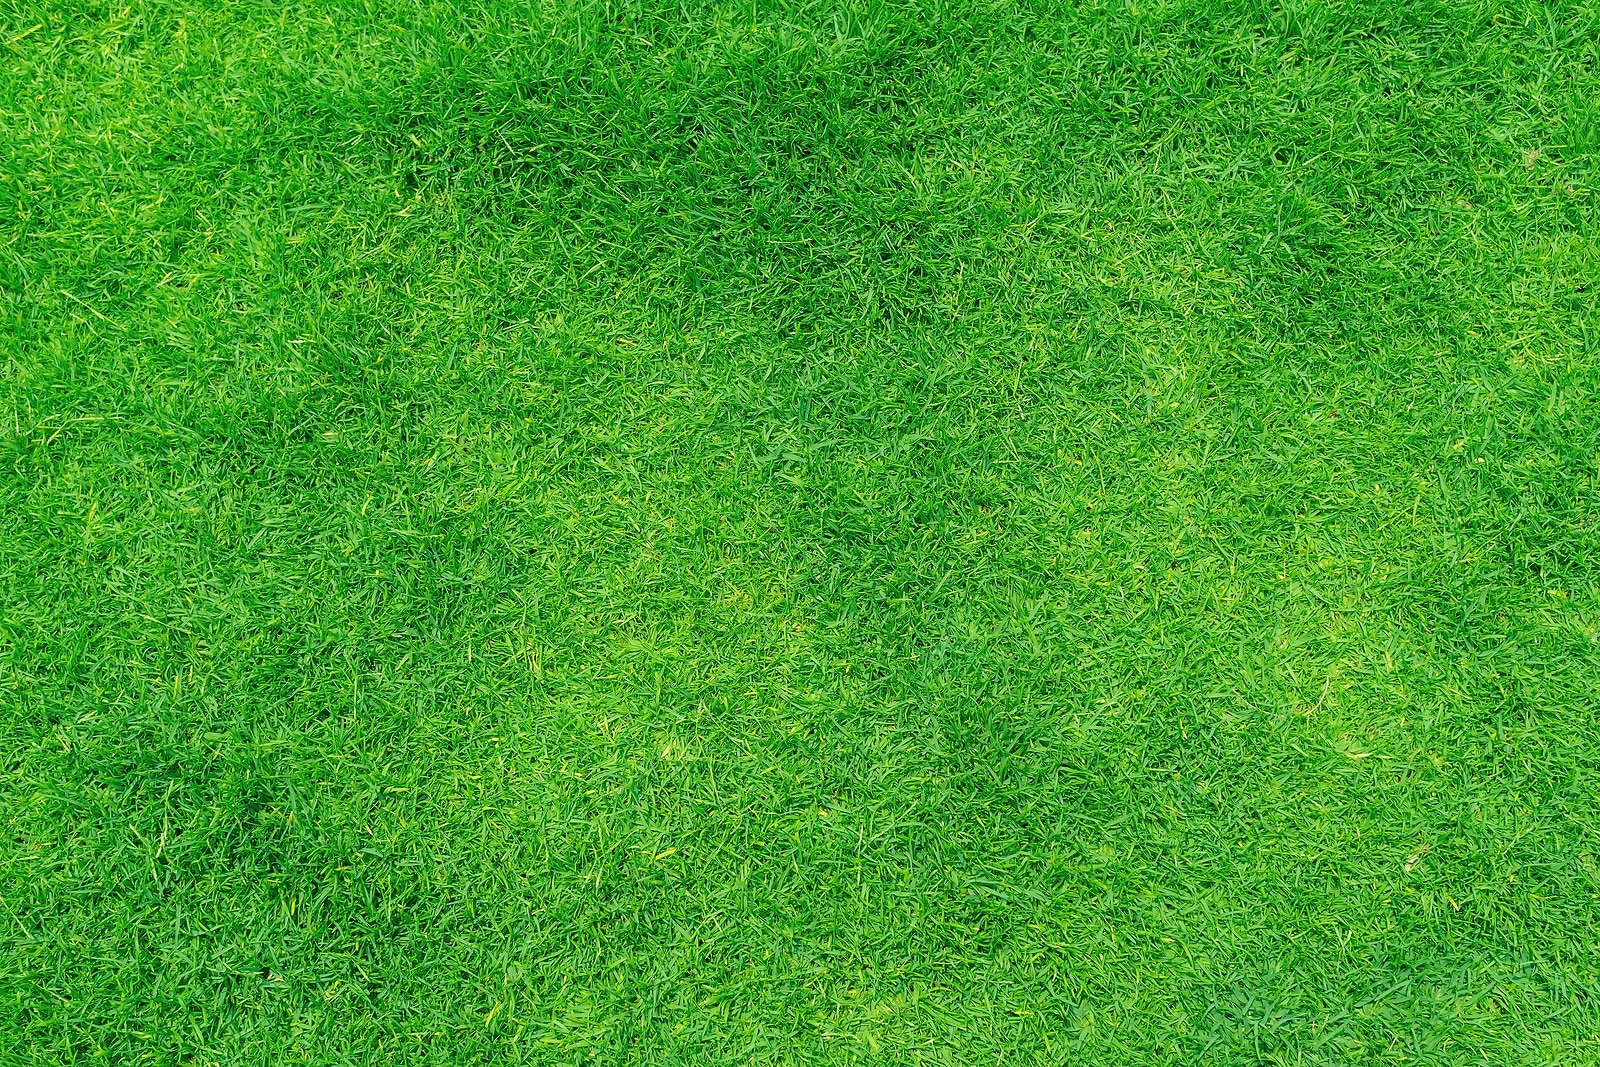 Benefits of Artificial Grass for Your Business